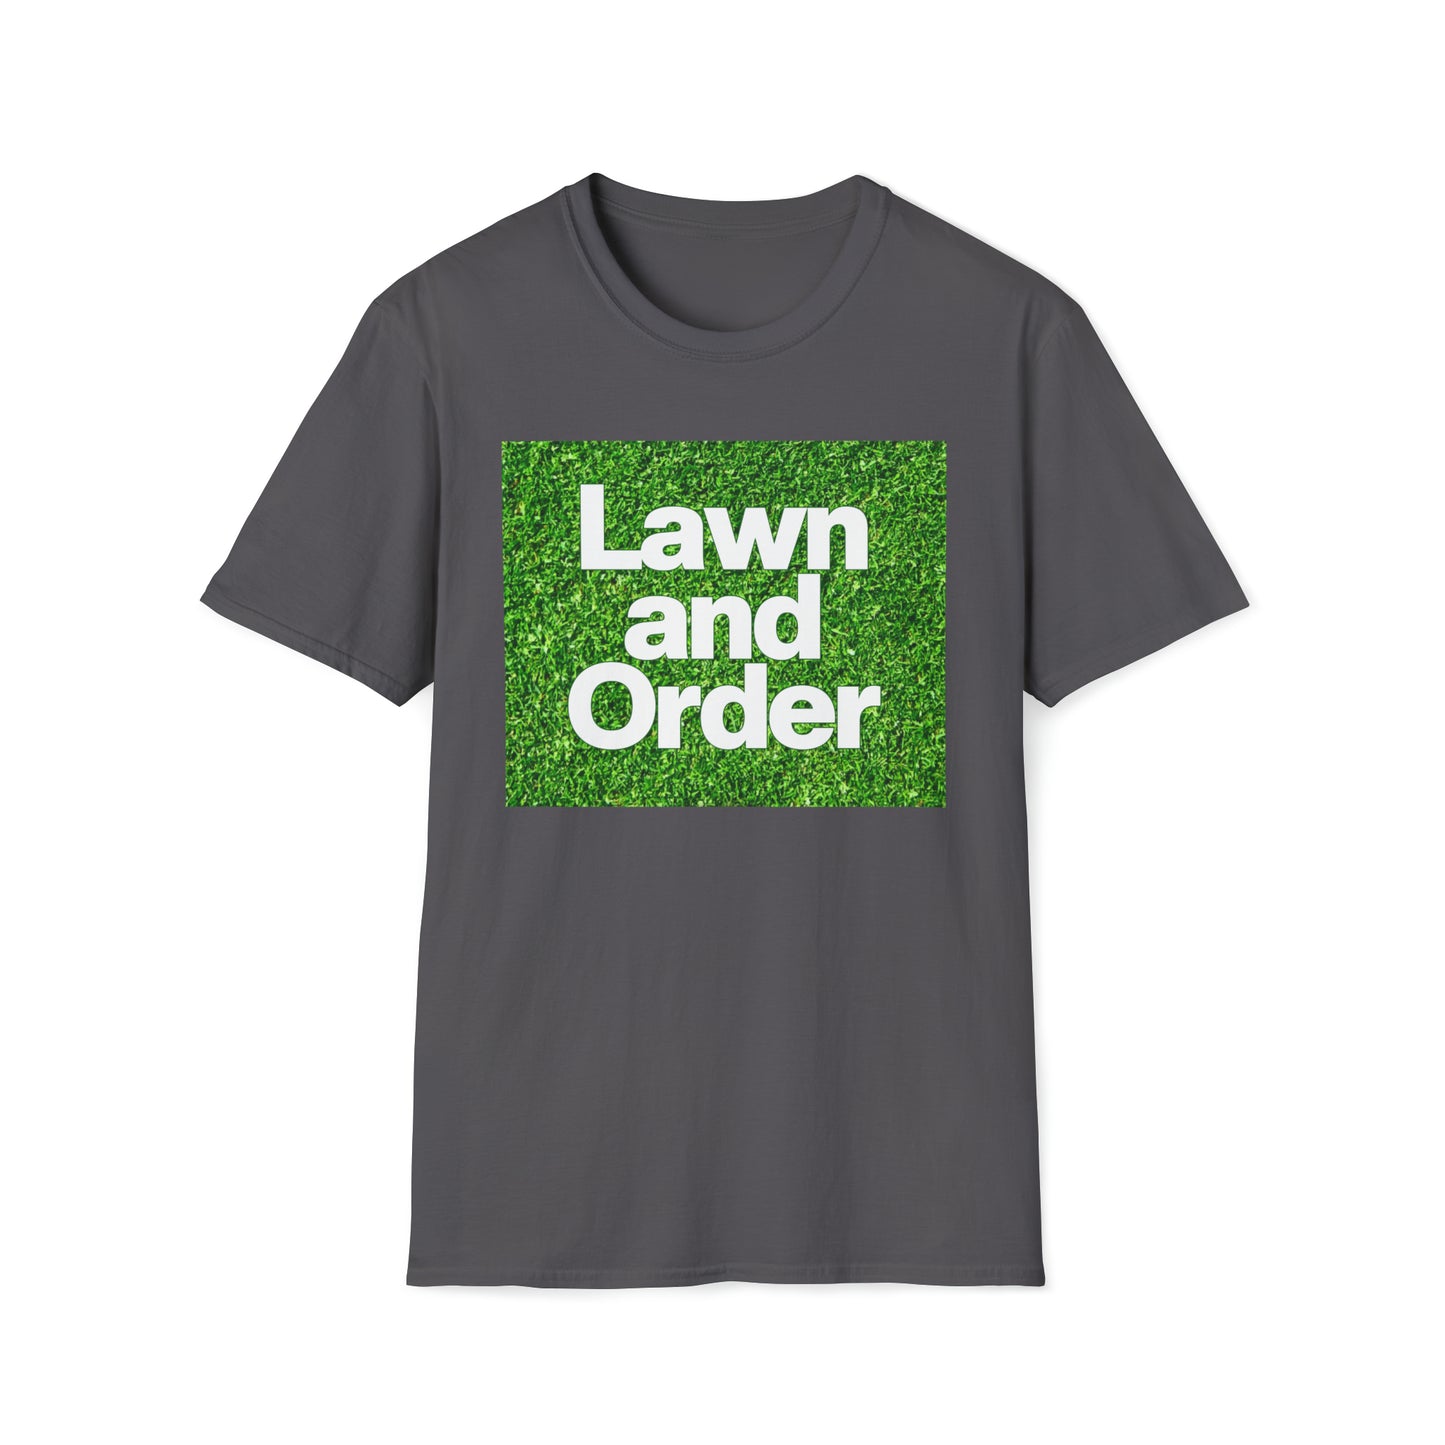 Lawn and Order Shirt, Law and Order Parody Shirt